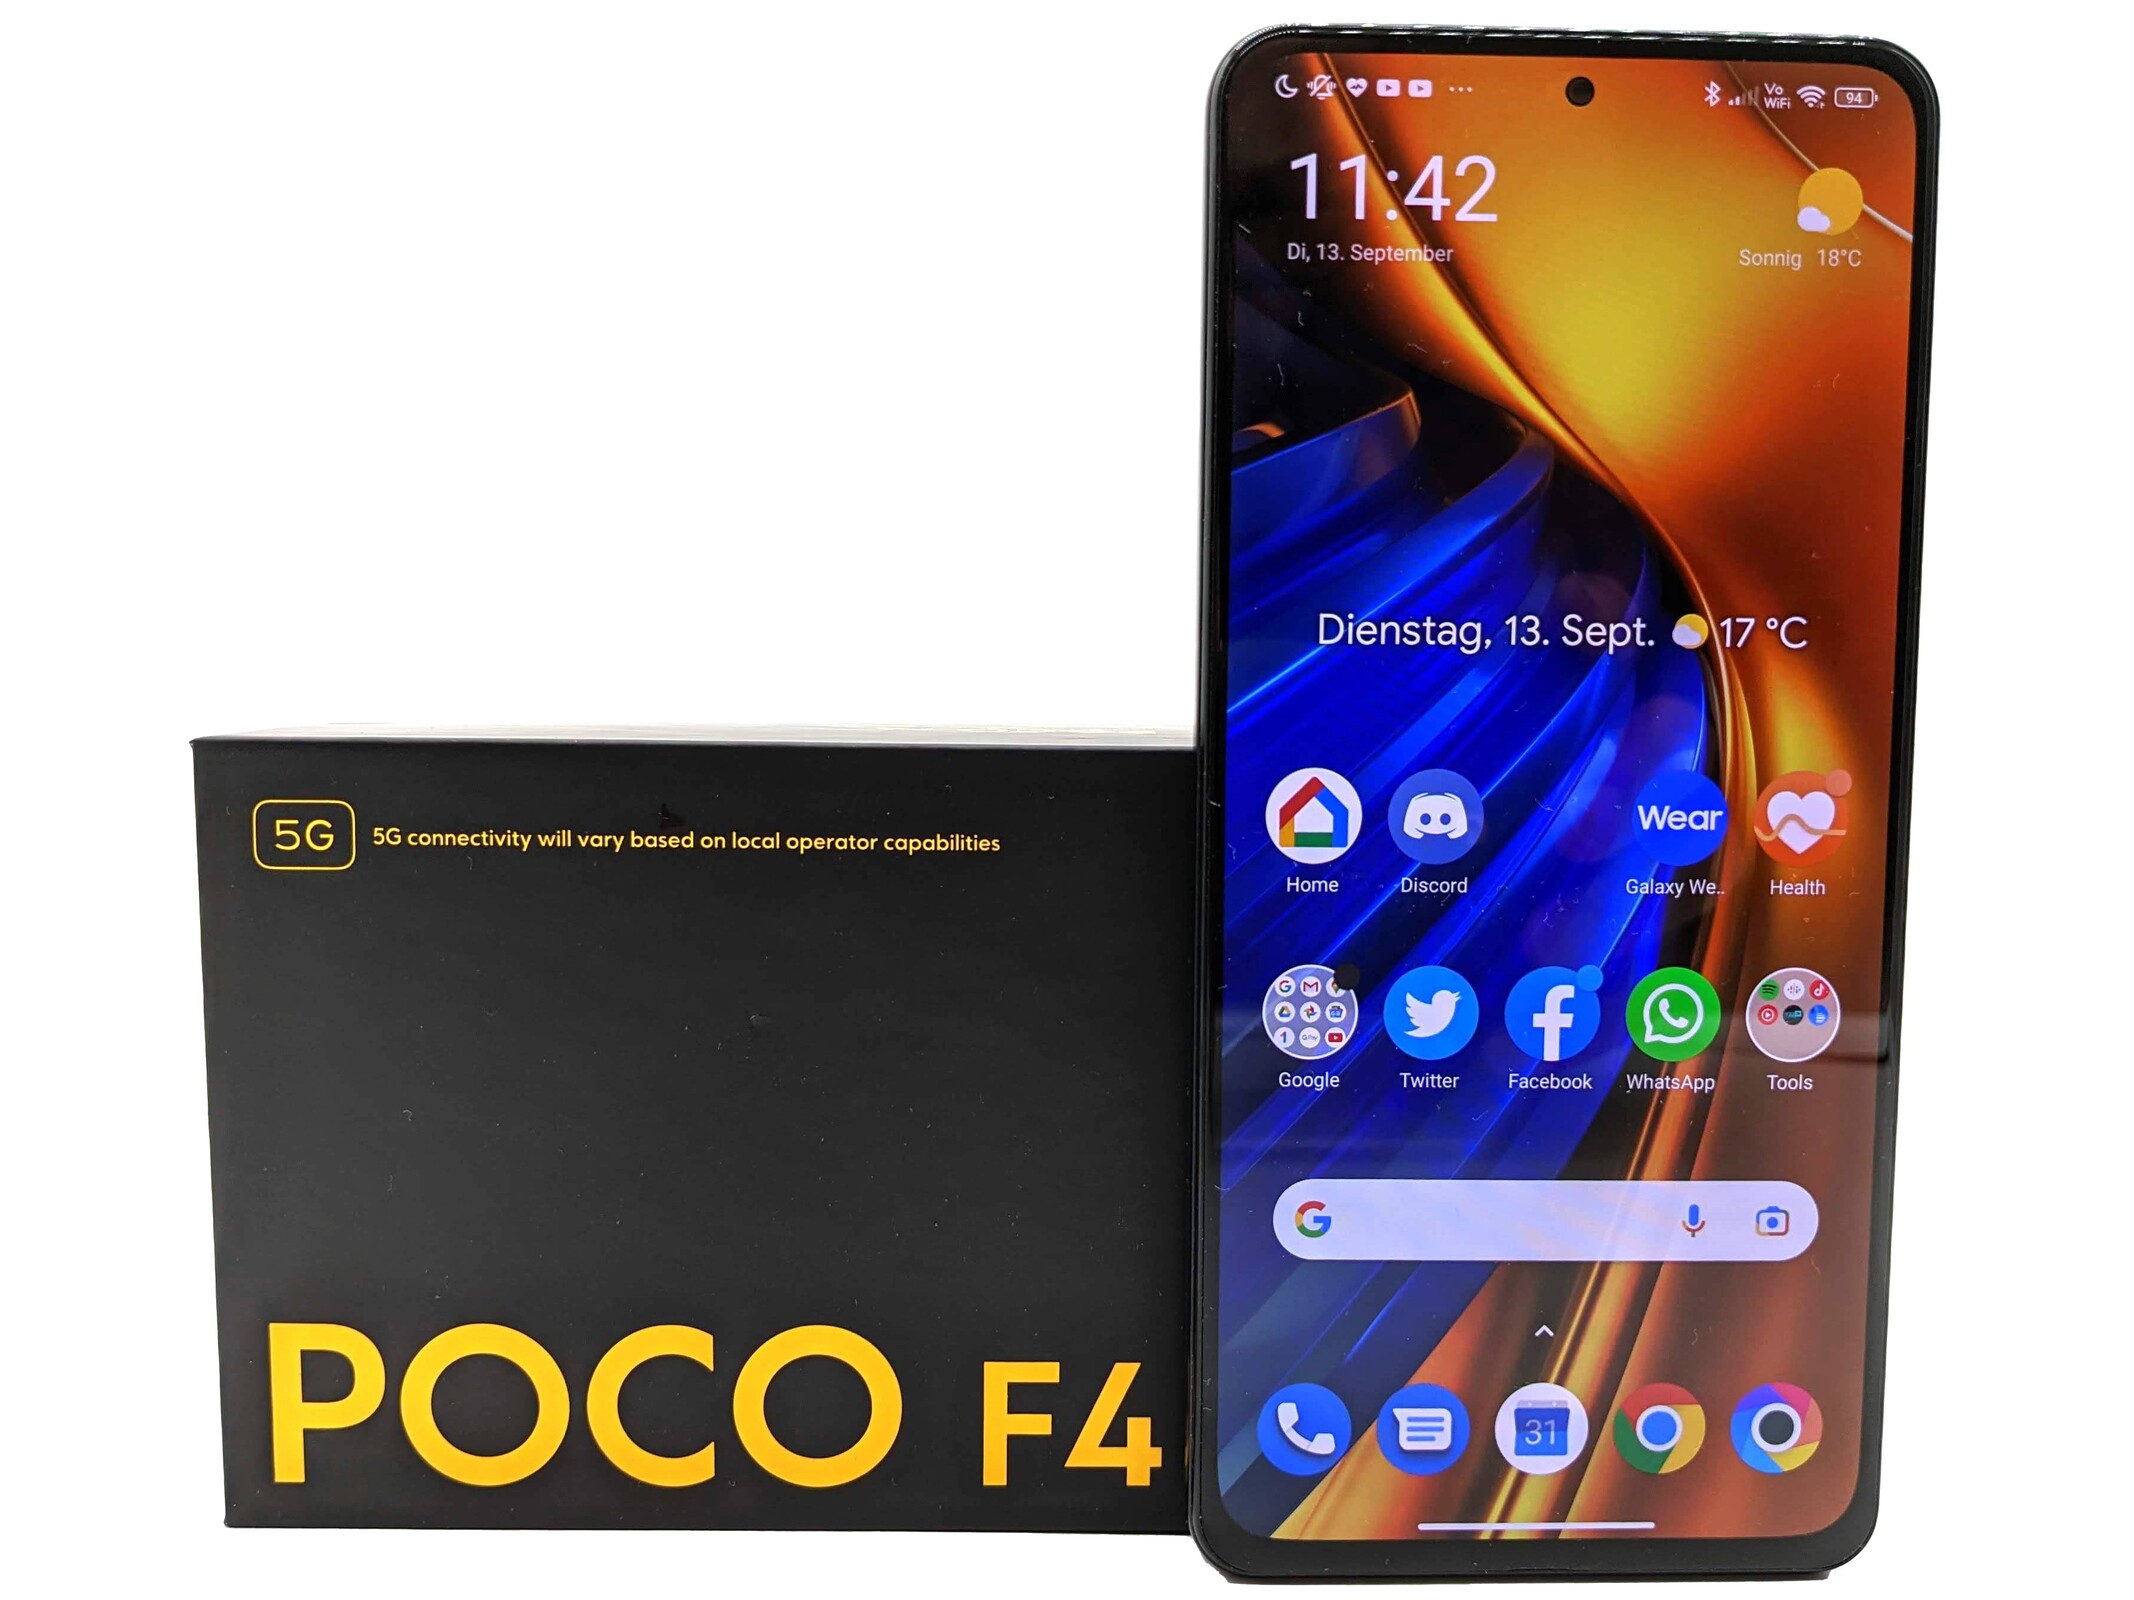 Poco F4 GT global pricing leaks ahead of launch - NotebookCheck